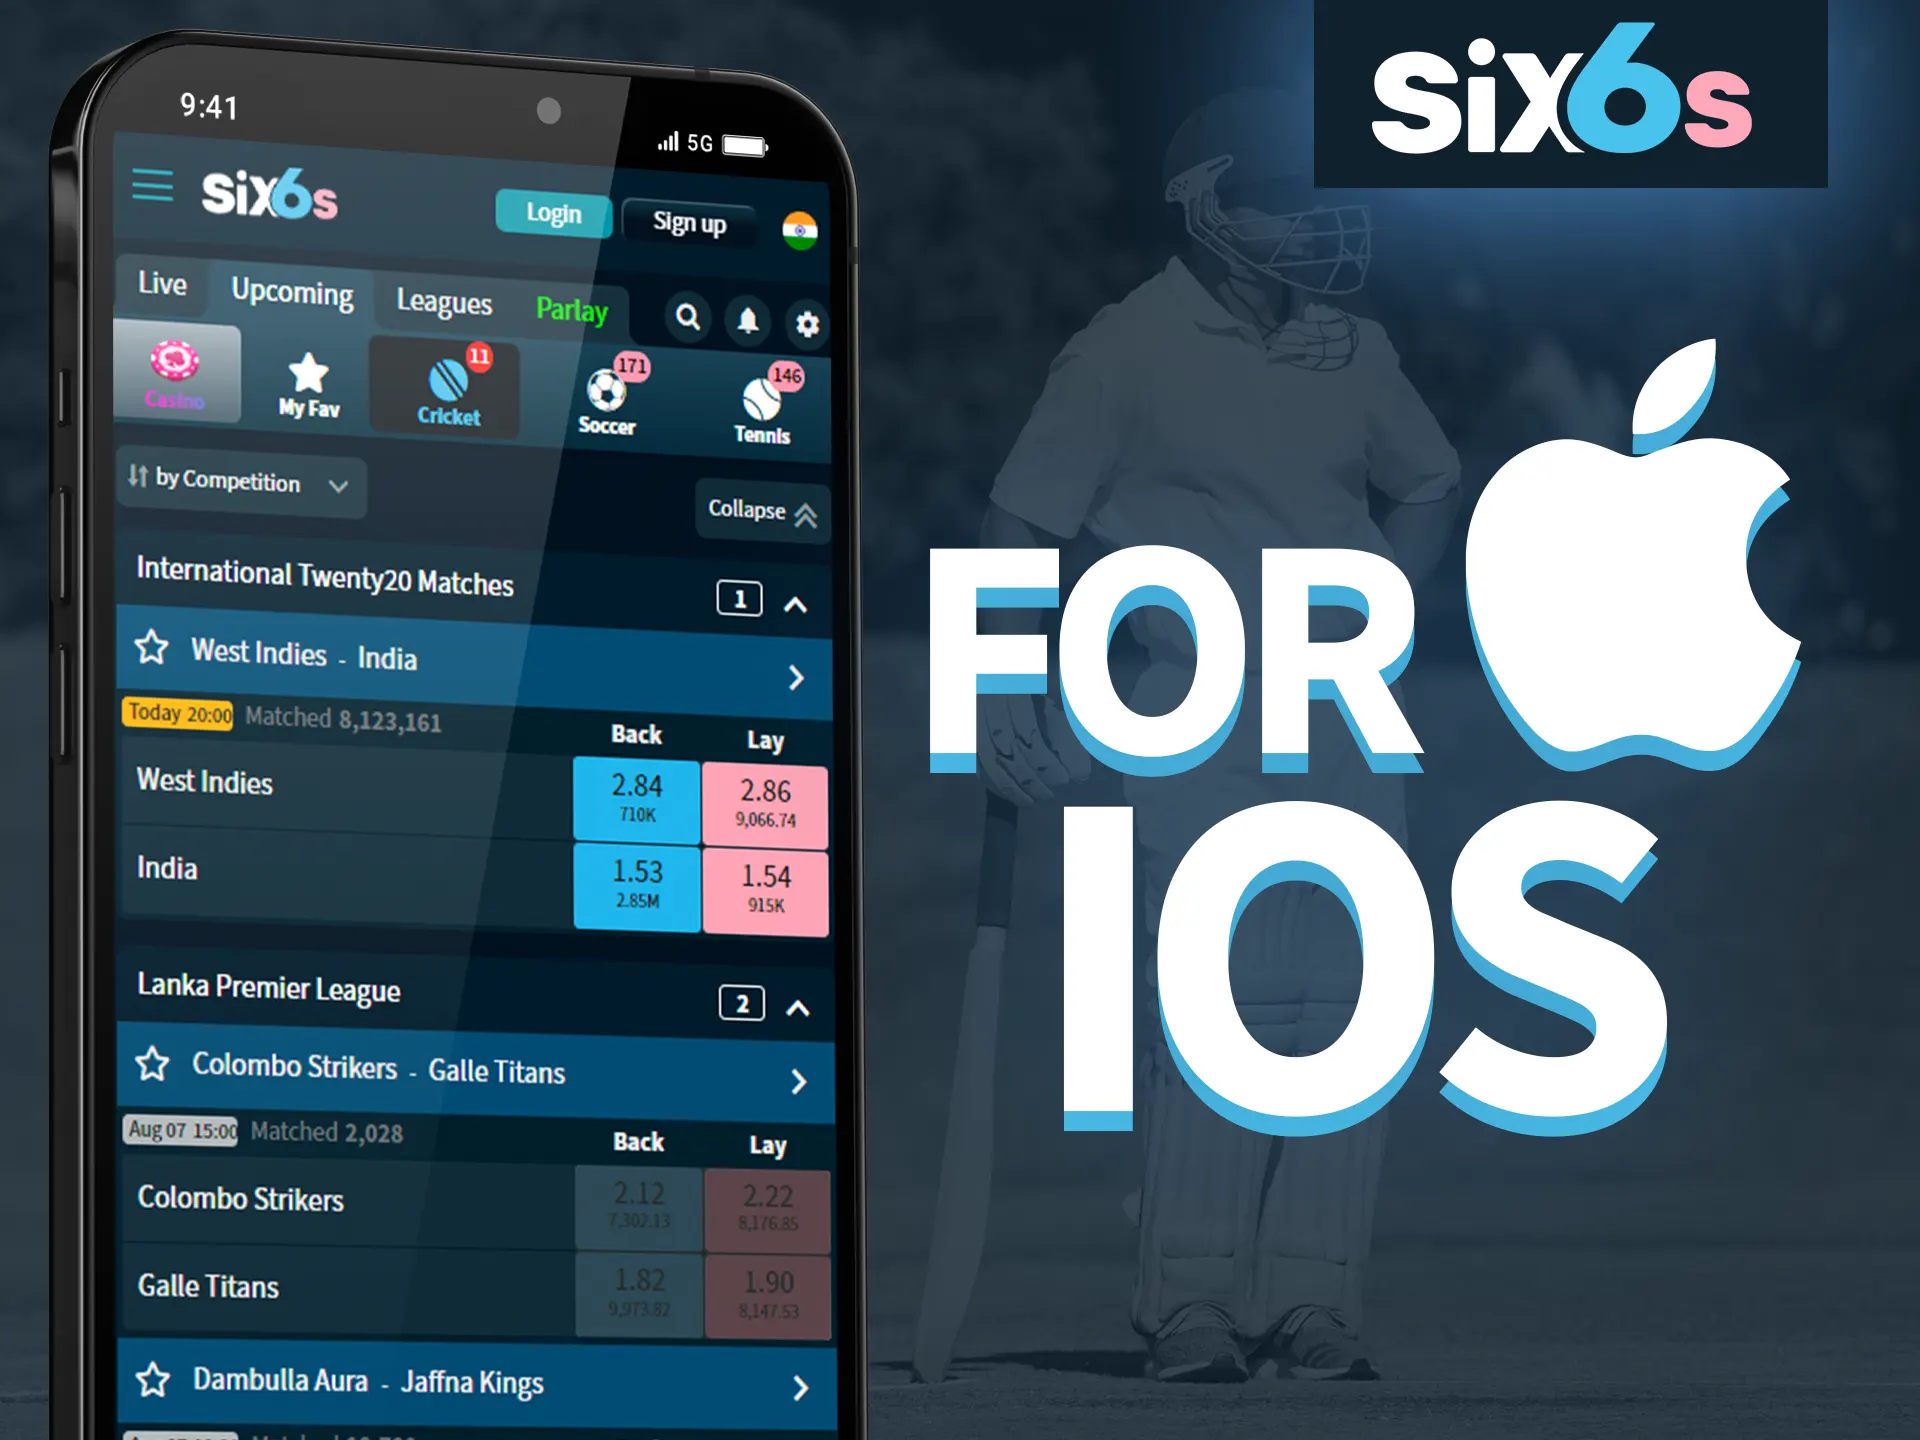 Six6s is available on any iOS device.